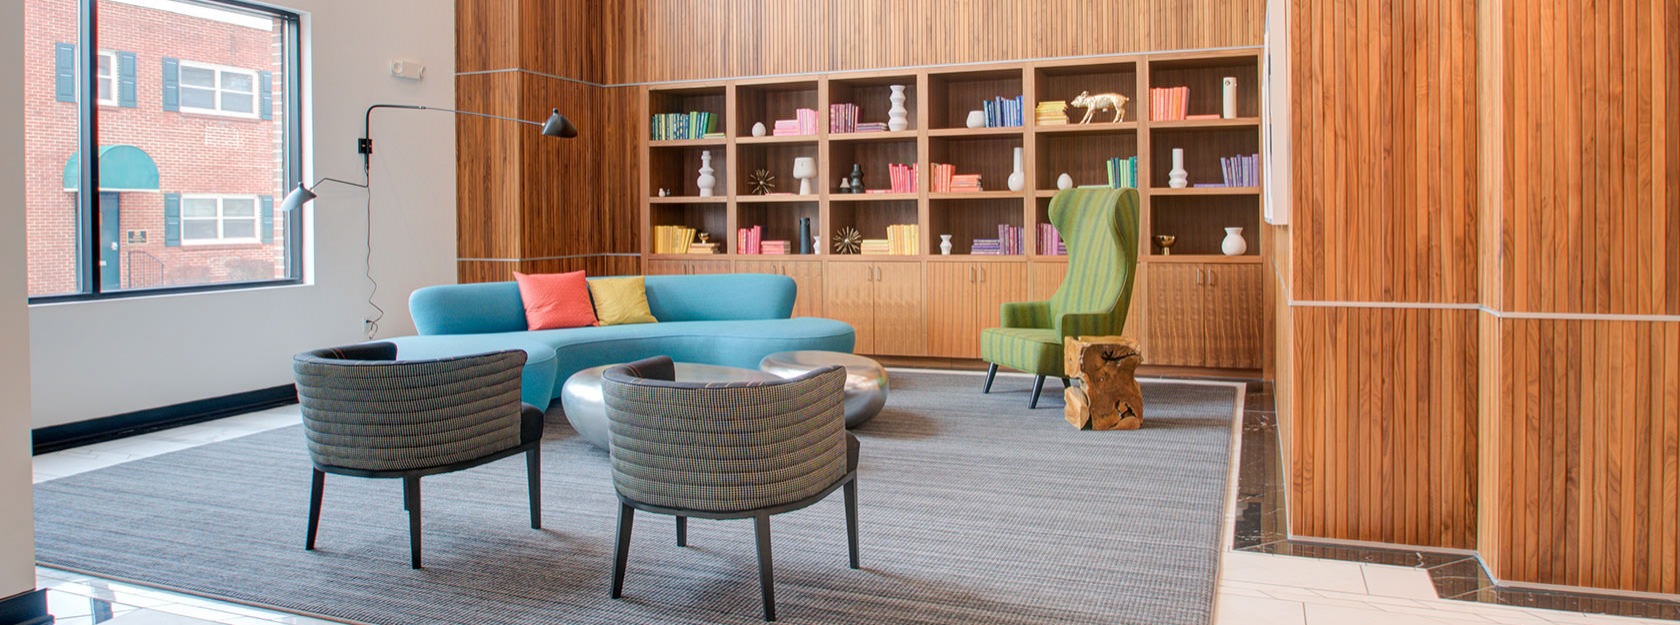 social area in lobby with bookshelves